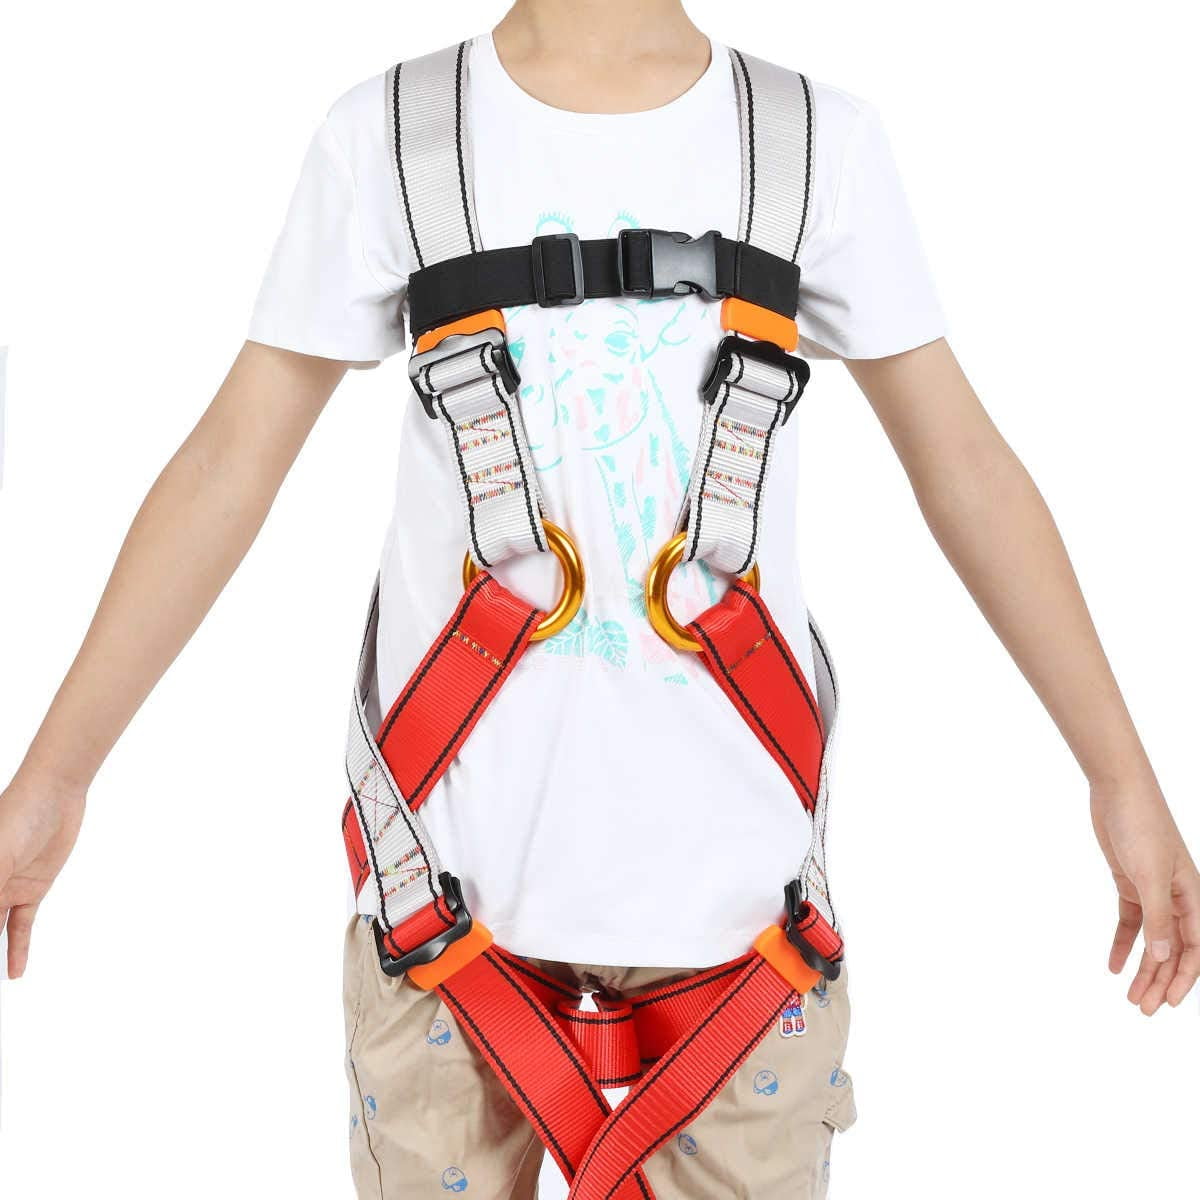 Xben Kids Full Body Harness Youth Safety Comfort Zipline Climbing Harness Belts for Outdoor Expanding Training Caving Rock Rappelling Equip 